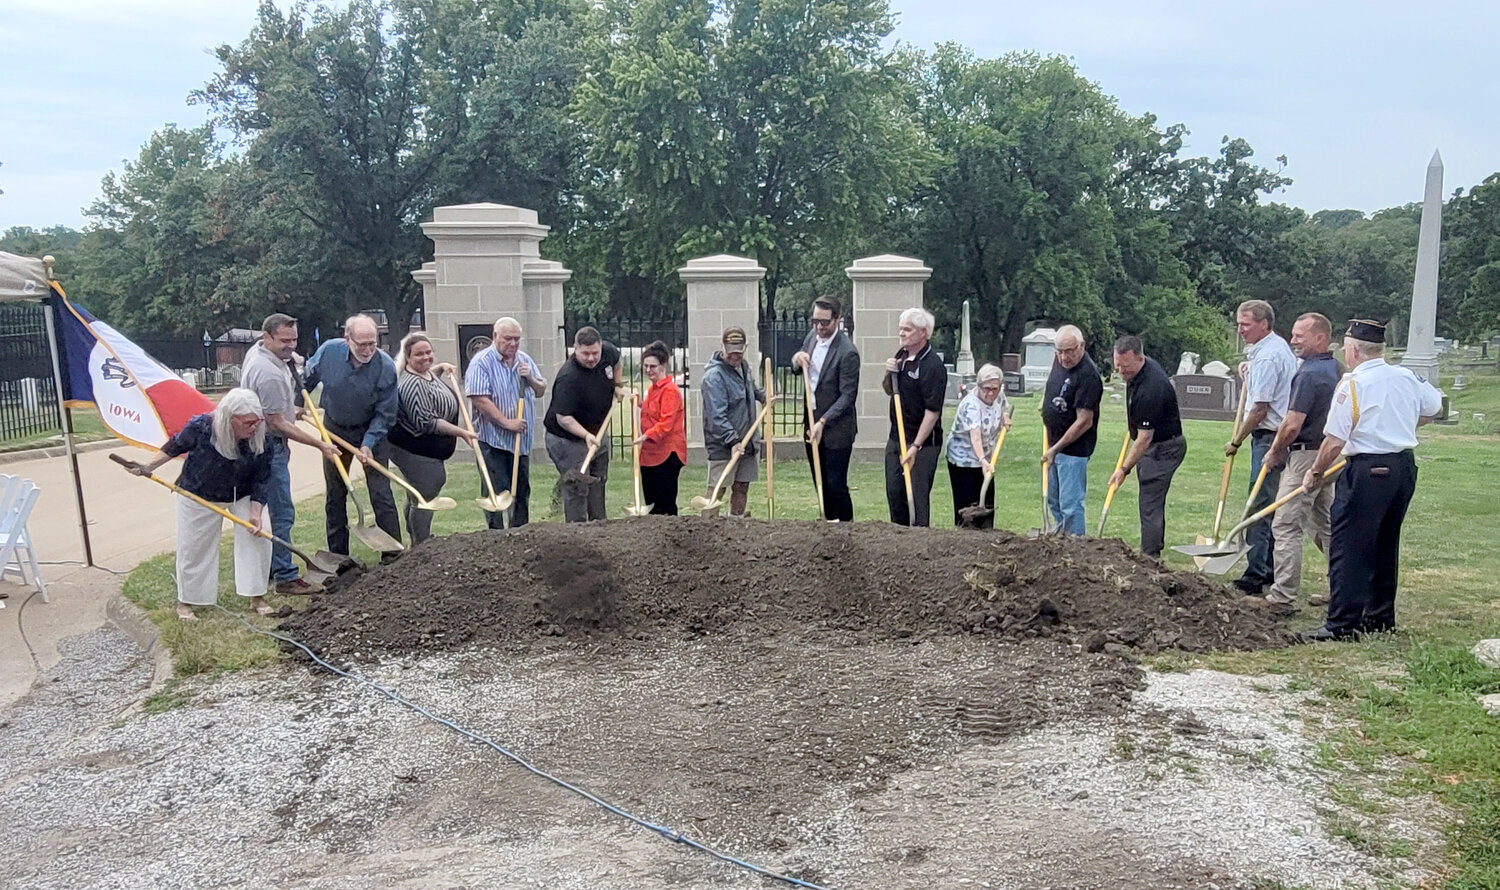 Dignitaries toss dirt as part of the ground breaking ceremony Friday at the Keokuk National Cemetery.